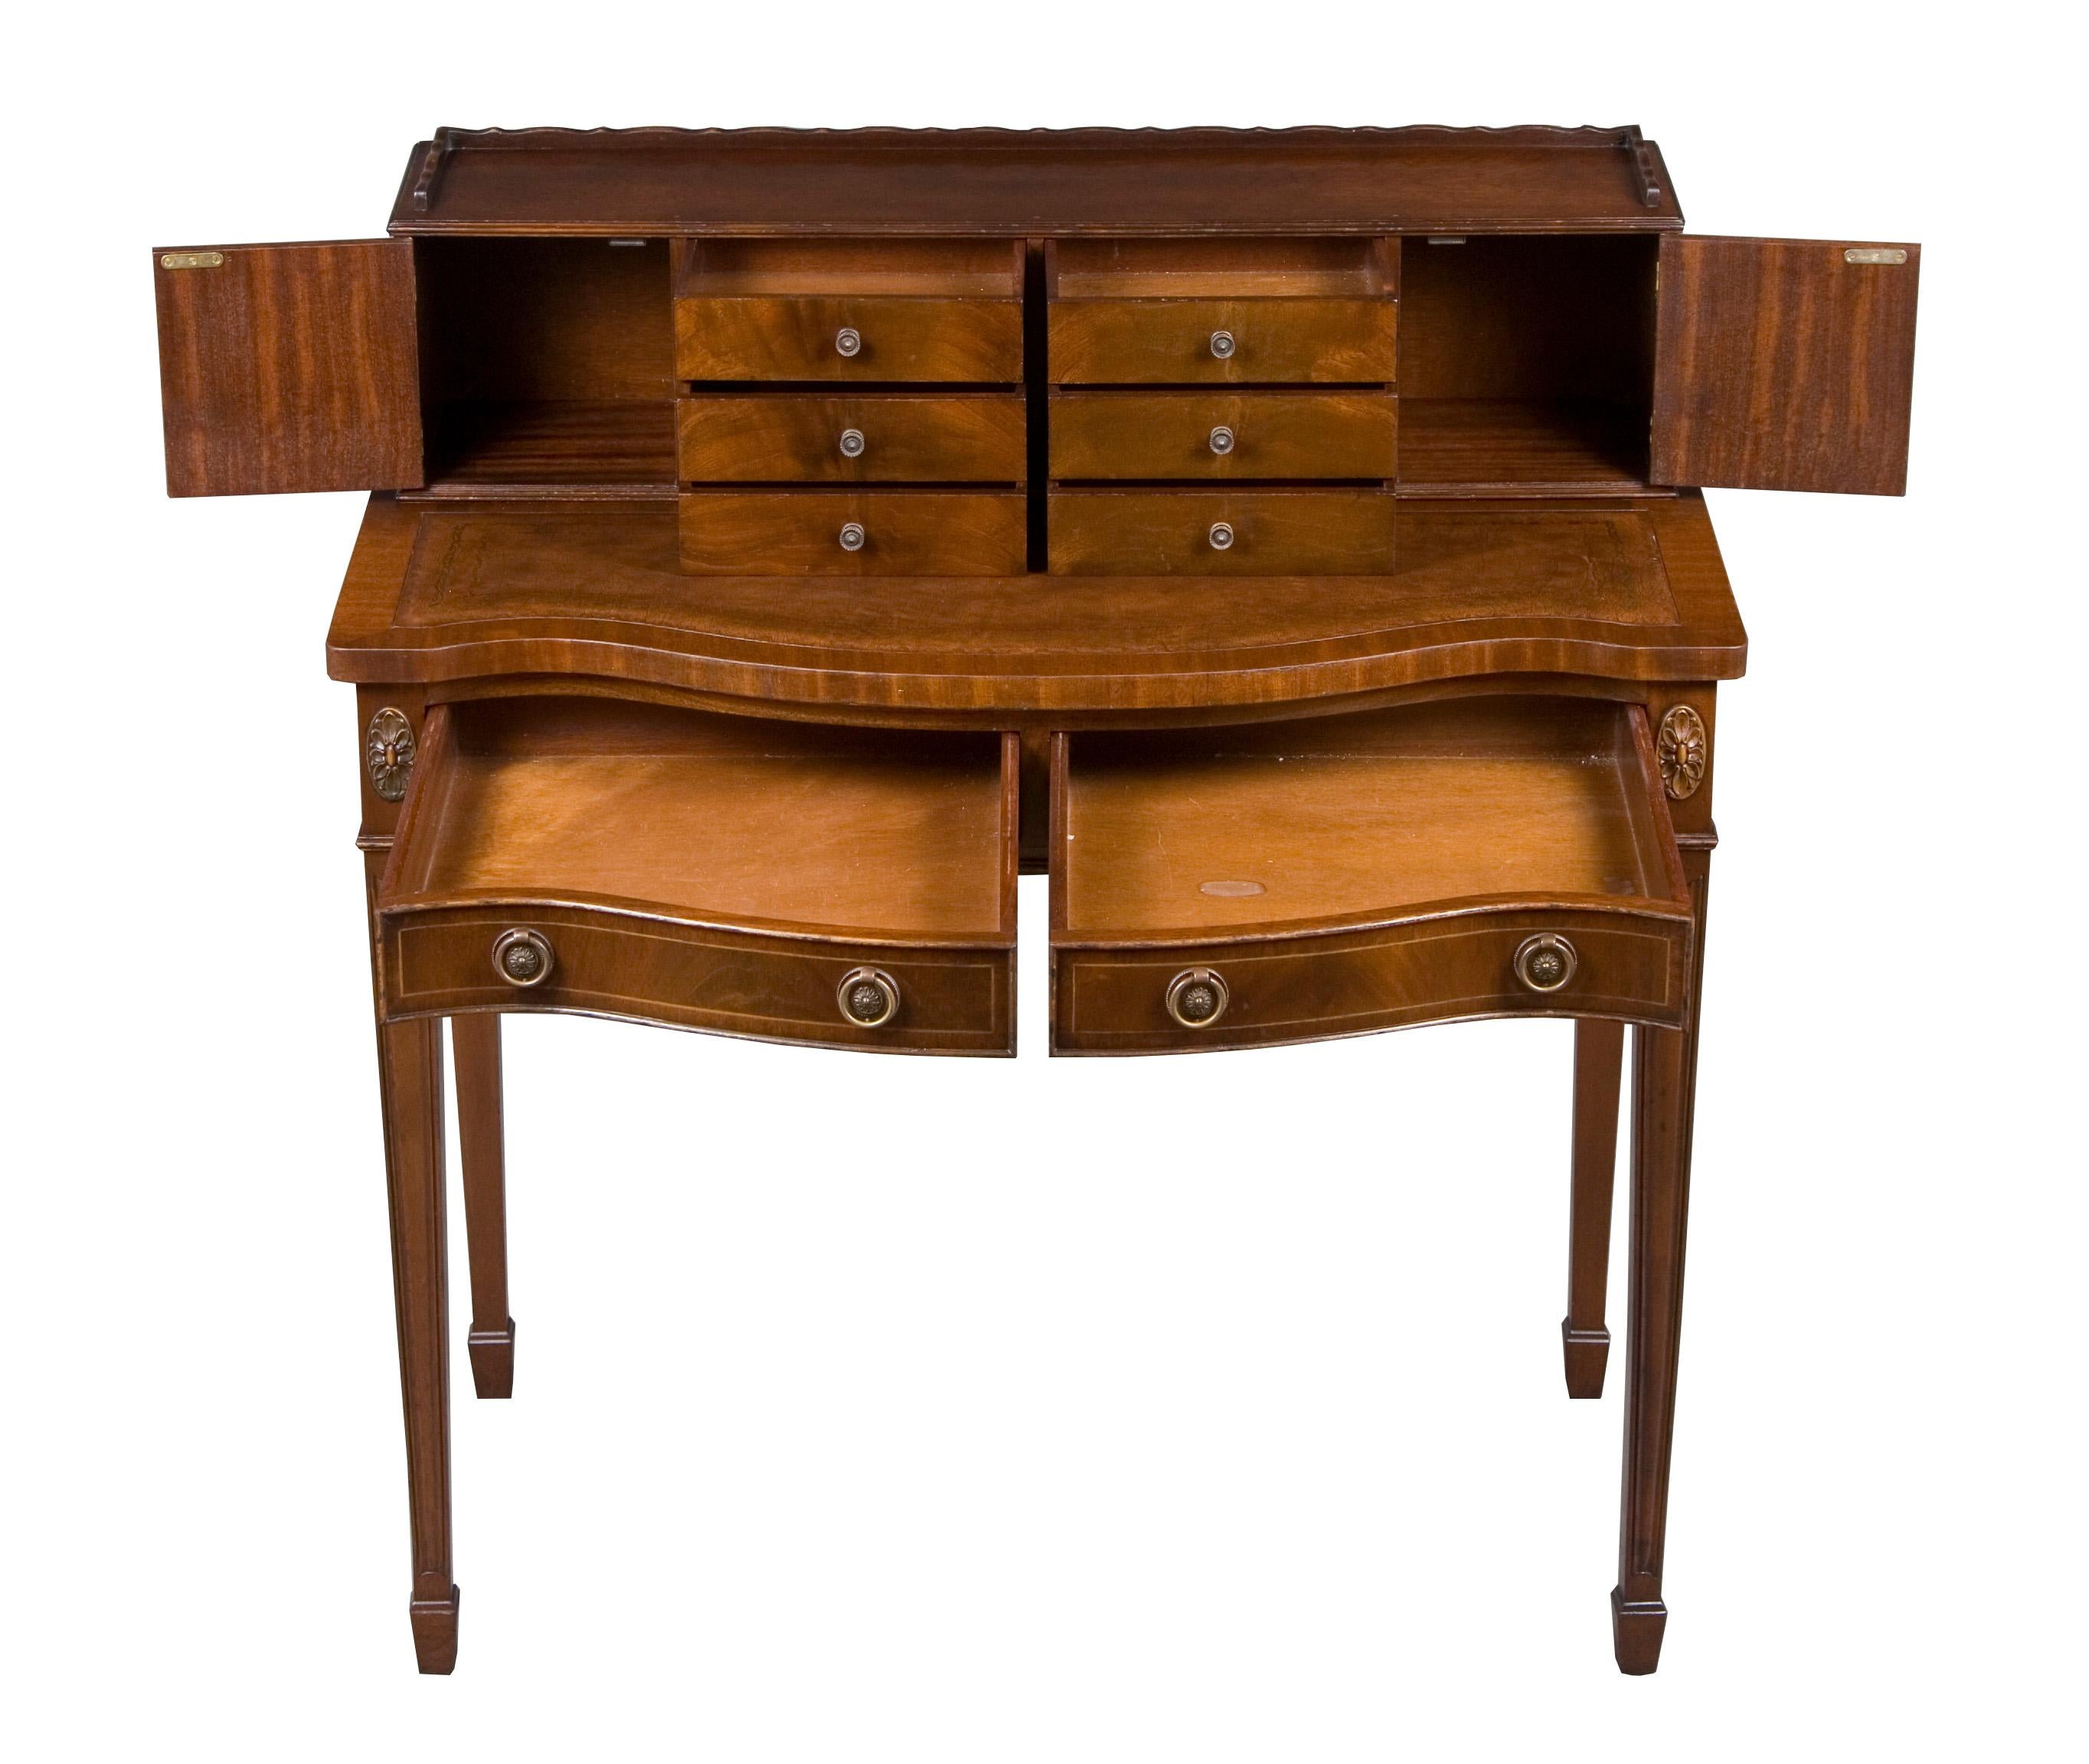 This quaint leather top writing desk has a bank of drawers and small cabinets on top providing great storage in a small space. With tapered legs, carved decorations, and antiqued brass pulls, this desk is beautiful as well as